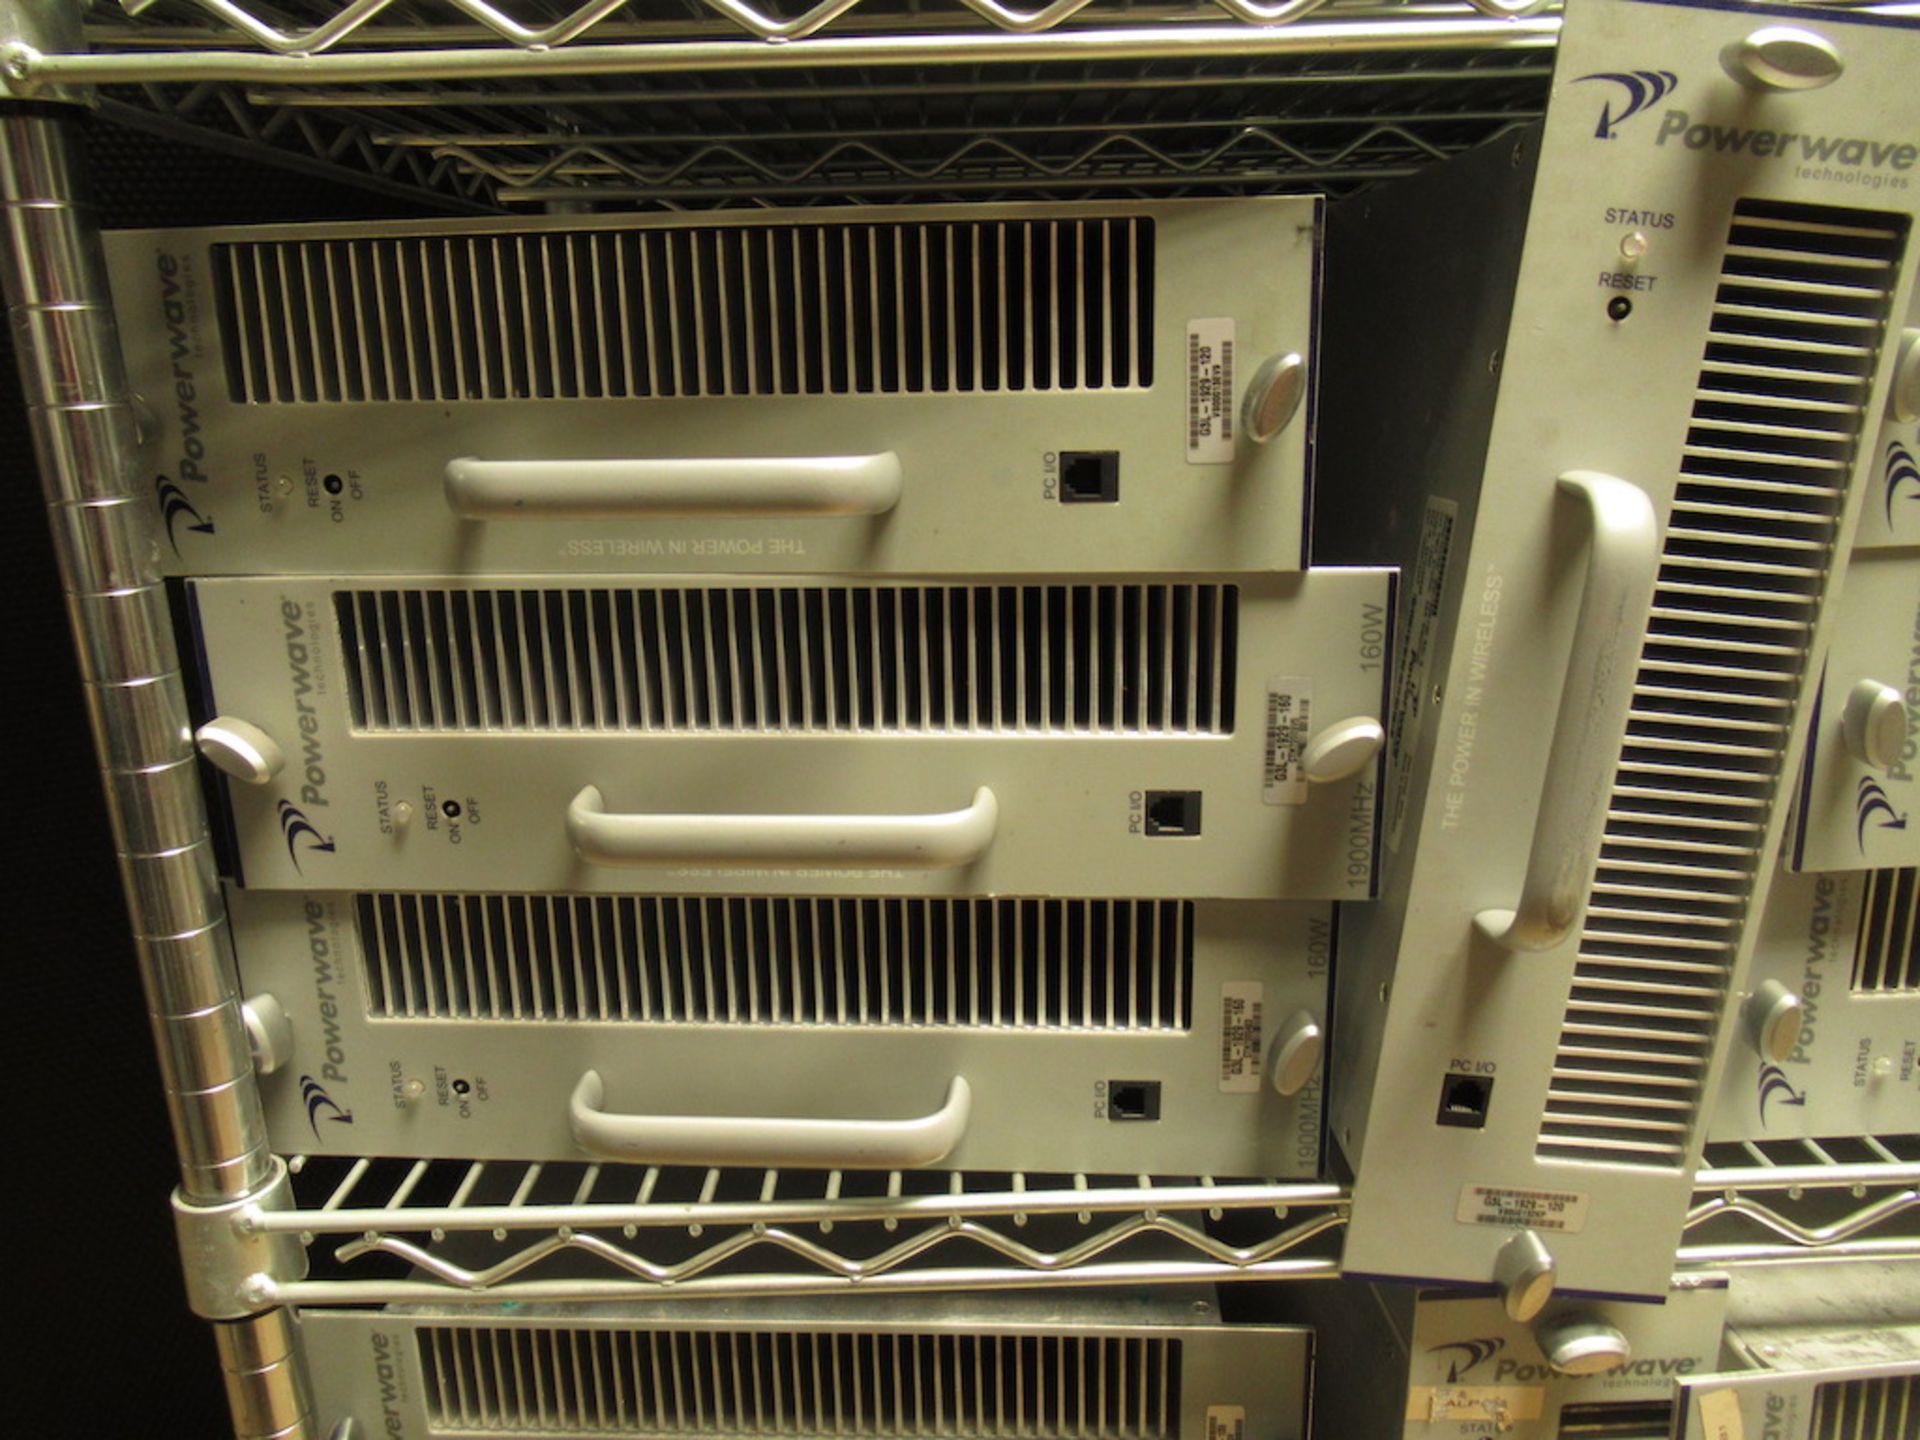 Lot to Include Entire Rack: (1) Powerwave 1 Command Combiner, (14) Powerwave G3L-1929-120, - Image 9 of 15